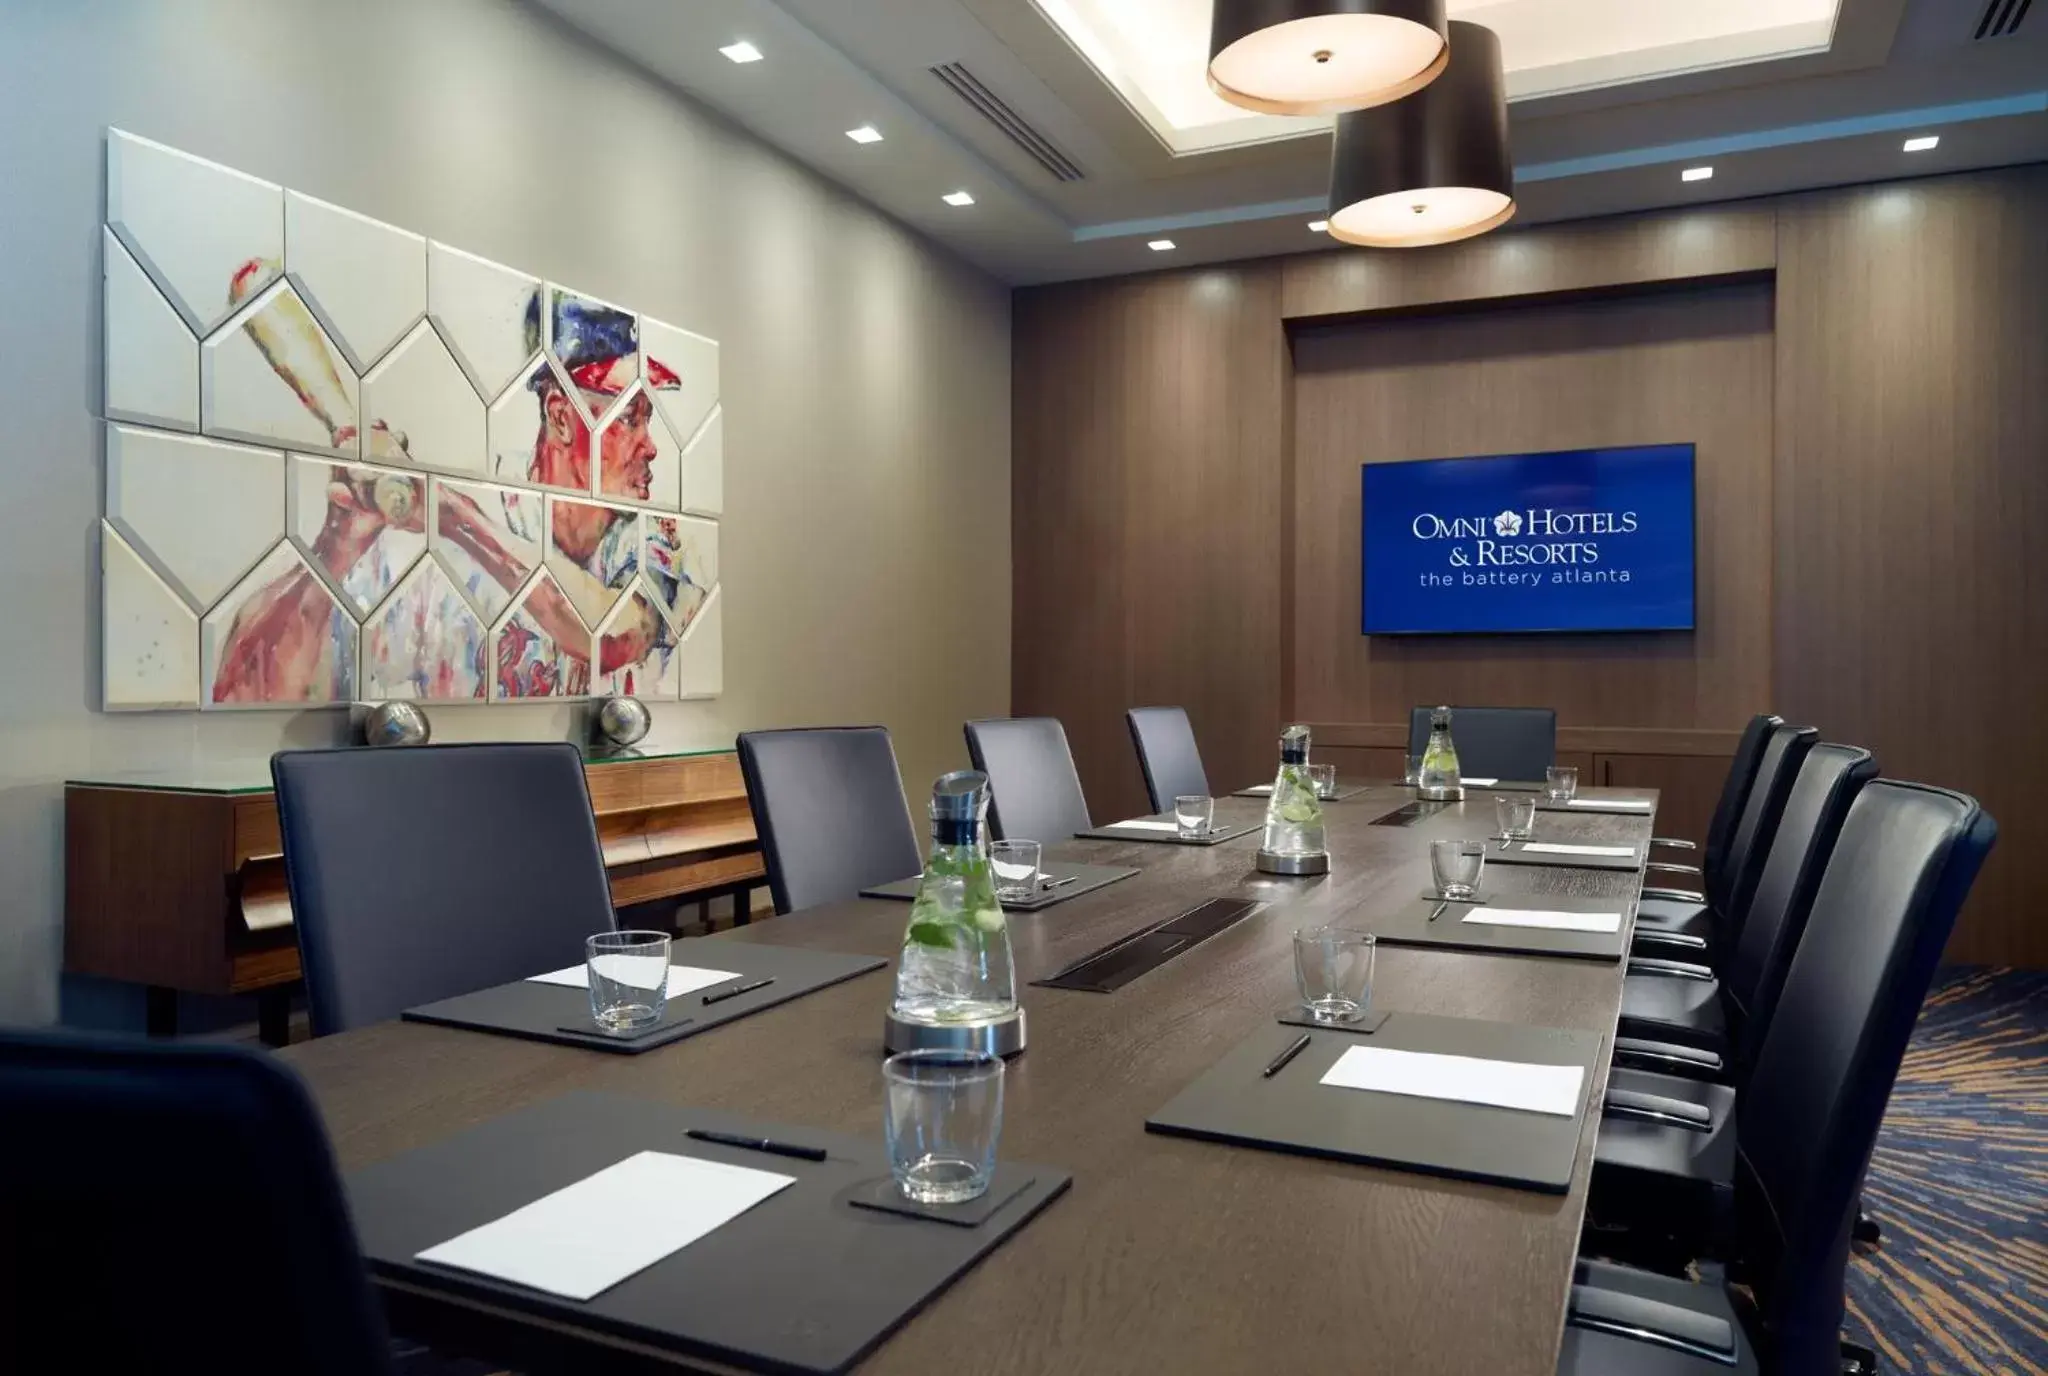 Meeting/conference room, Business Area/Conference Room in Omni Hotel at the Battery Atlanta